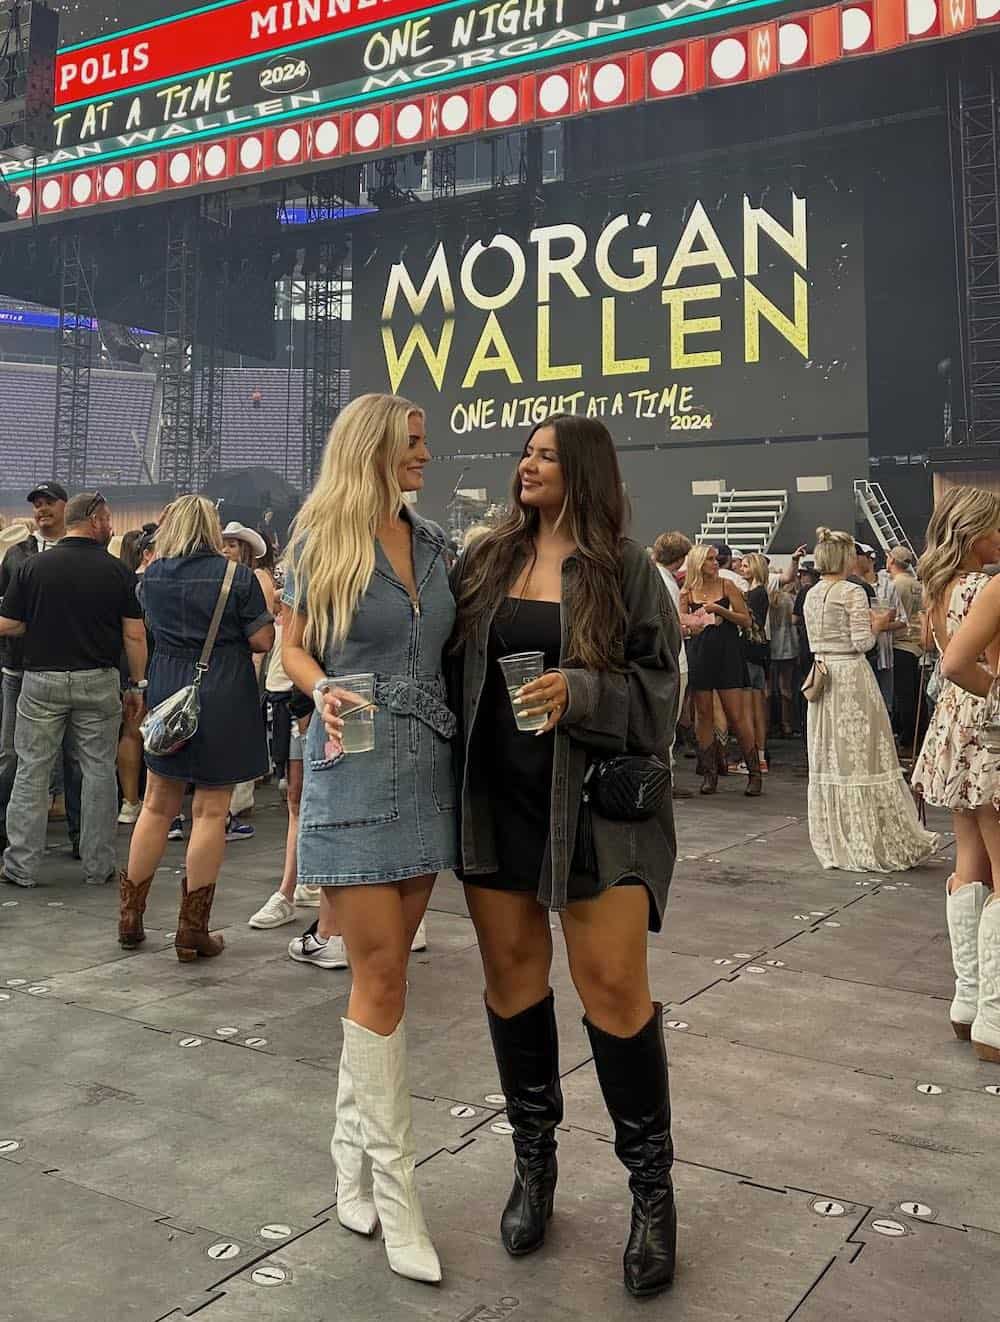 two women standing in front of a Morgan Wallen concert sign wearing cute outfits